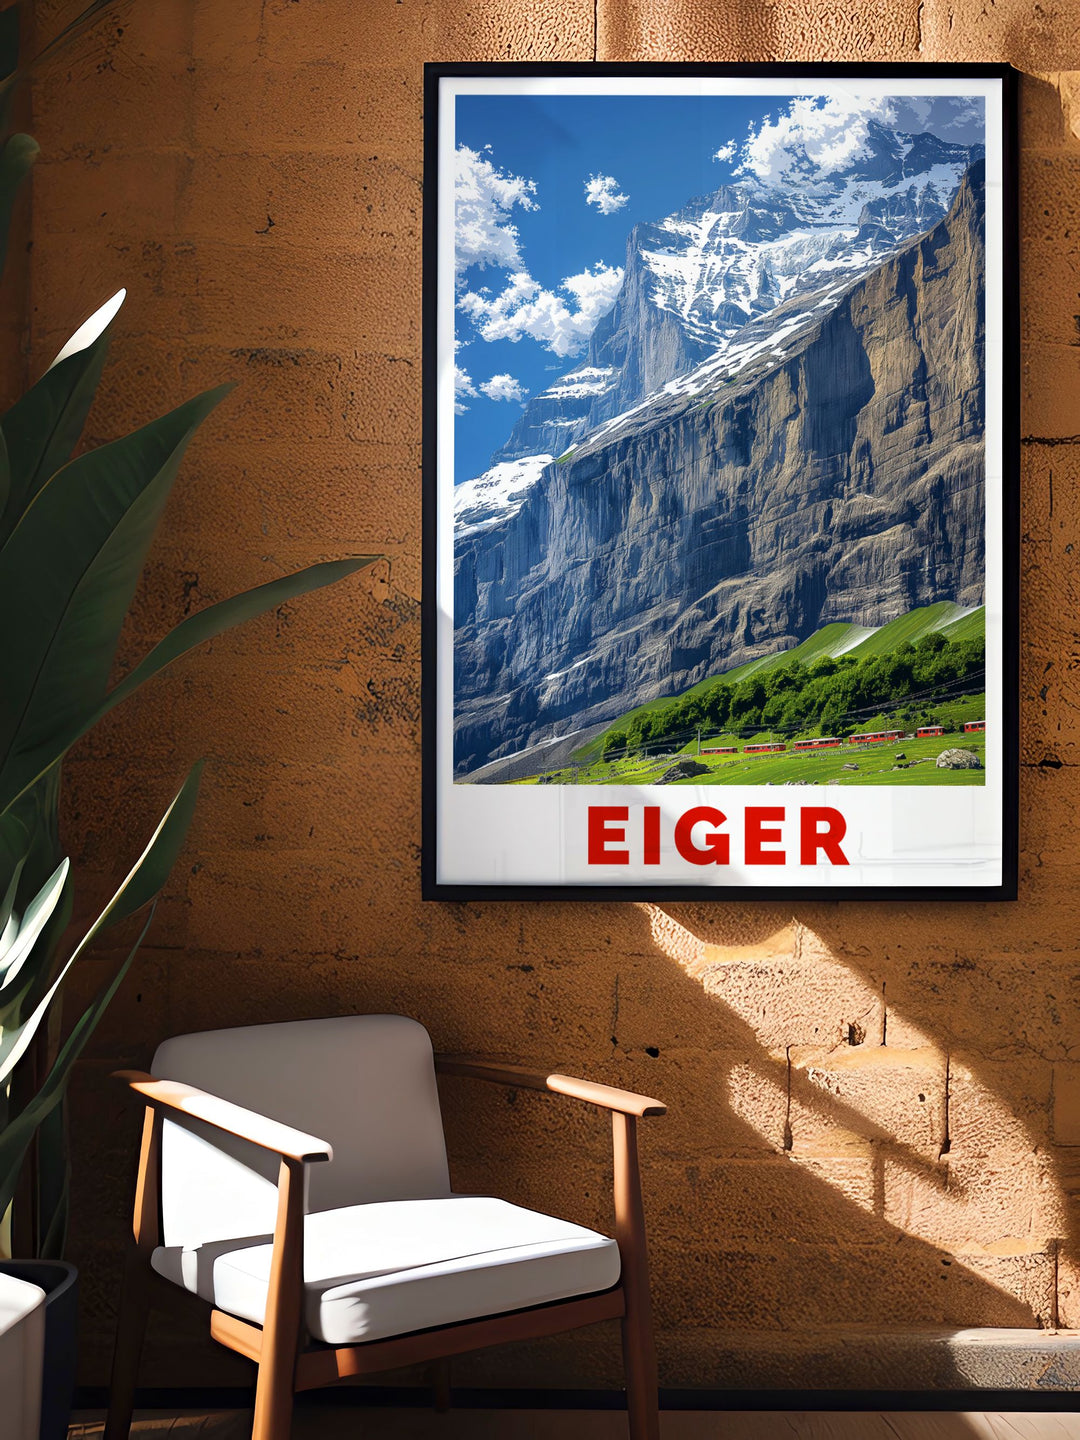 Eiger rock climbing poster depicting climbers tackling the challenging routes of the Eiger North Face a thrilling addition to any adventure enthusiasts wall art collection highlighting the rugged beauty of the Swiss Alps.